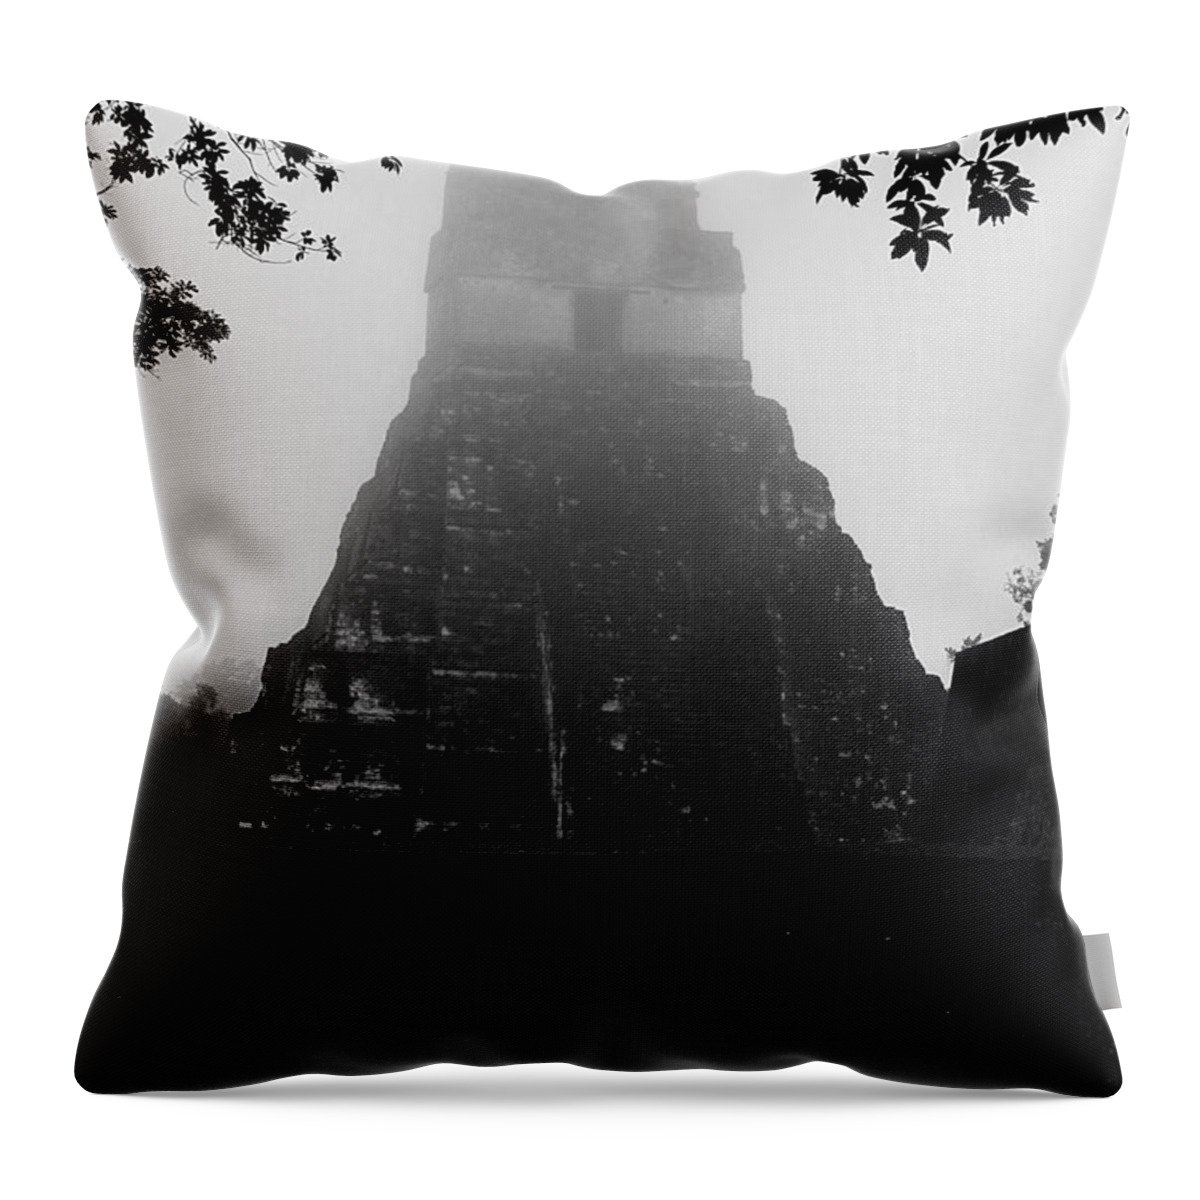 The Ruin Throw Pillow featuring the photograph Maya Ruins 2 by Xueling Zou